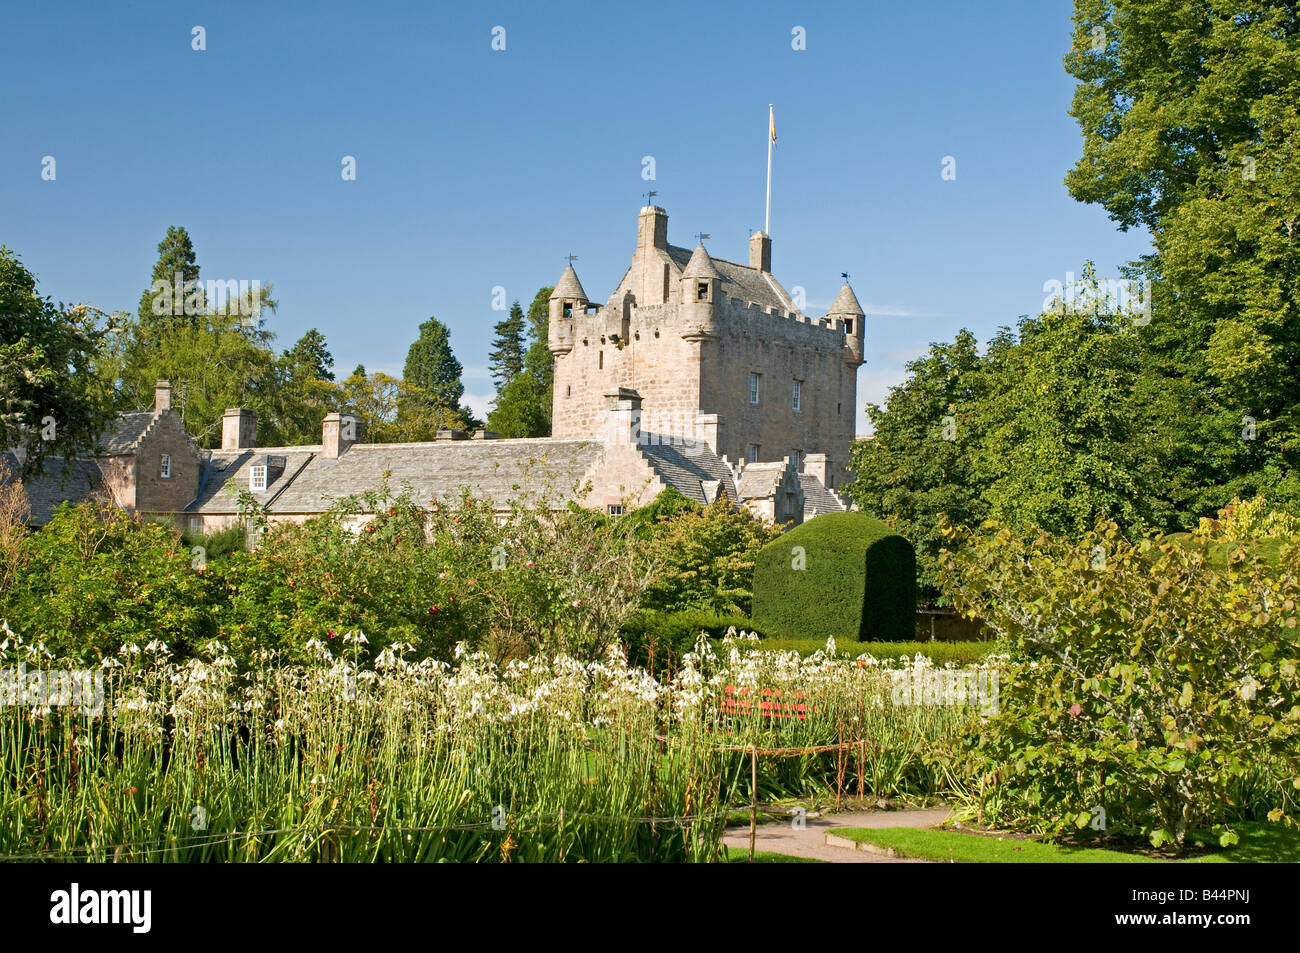 Cawdor Castle home ot the Thanes of Cawdor family seat of members of the Campbell Clan for over 800 years. Stock Photo